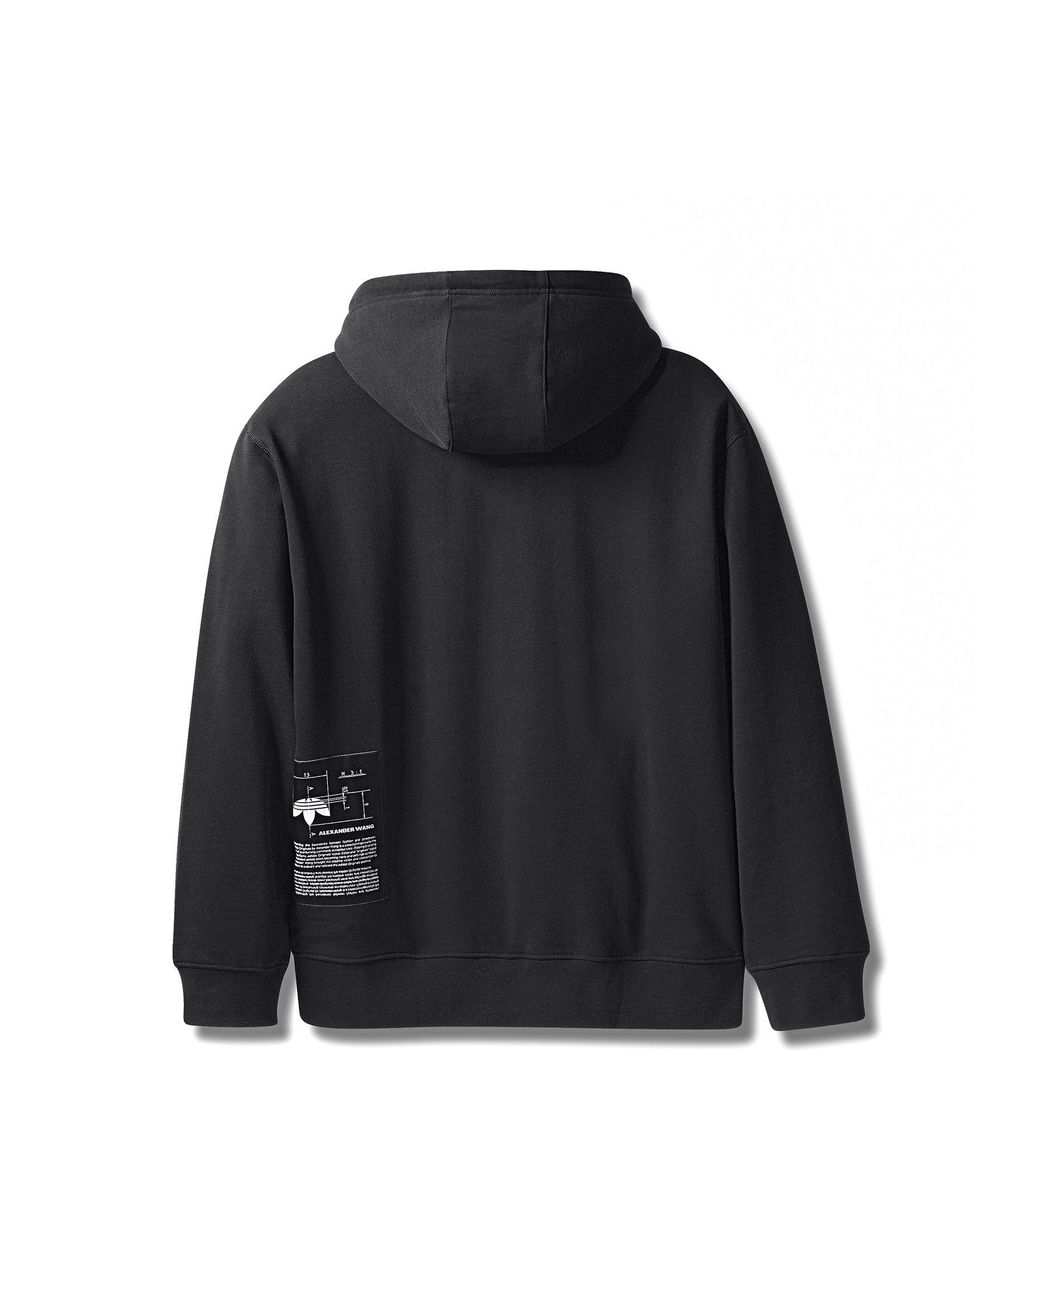 Alexander Wang Adidas Originals By Aw Graphic Hoodie in Black for Men | Lyst